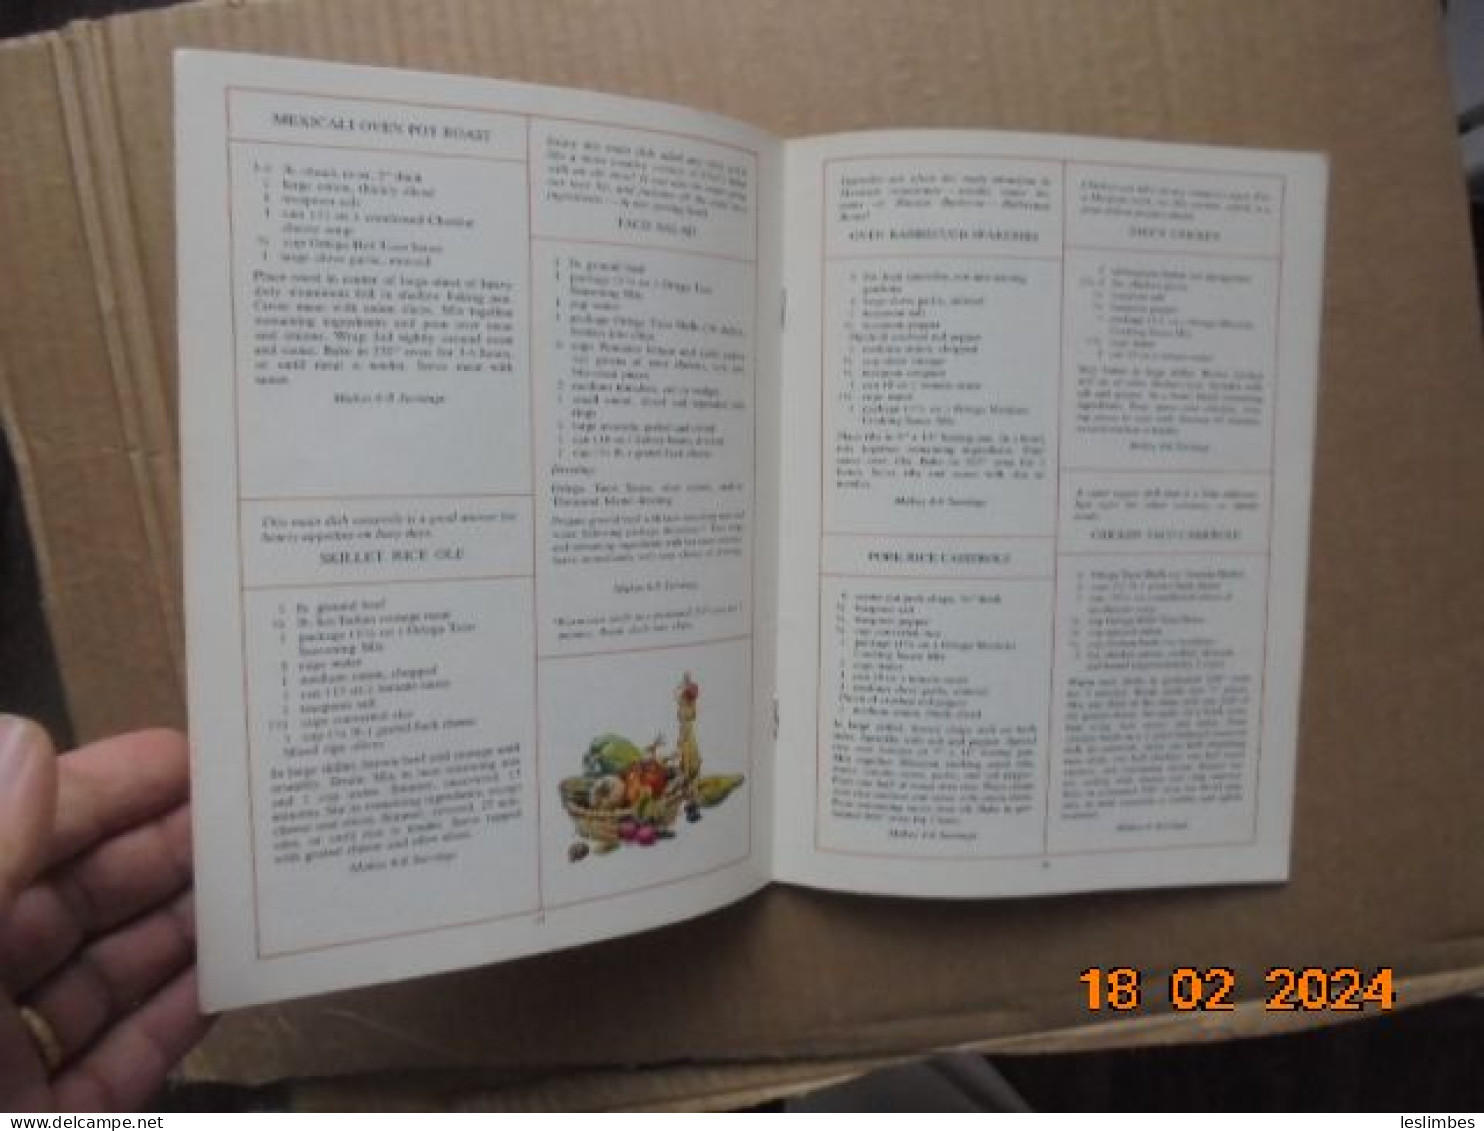 ORTEGA GUIDE TO MEXICAN COOKING - Heublein, Inc. 1978 - American (US)